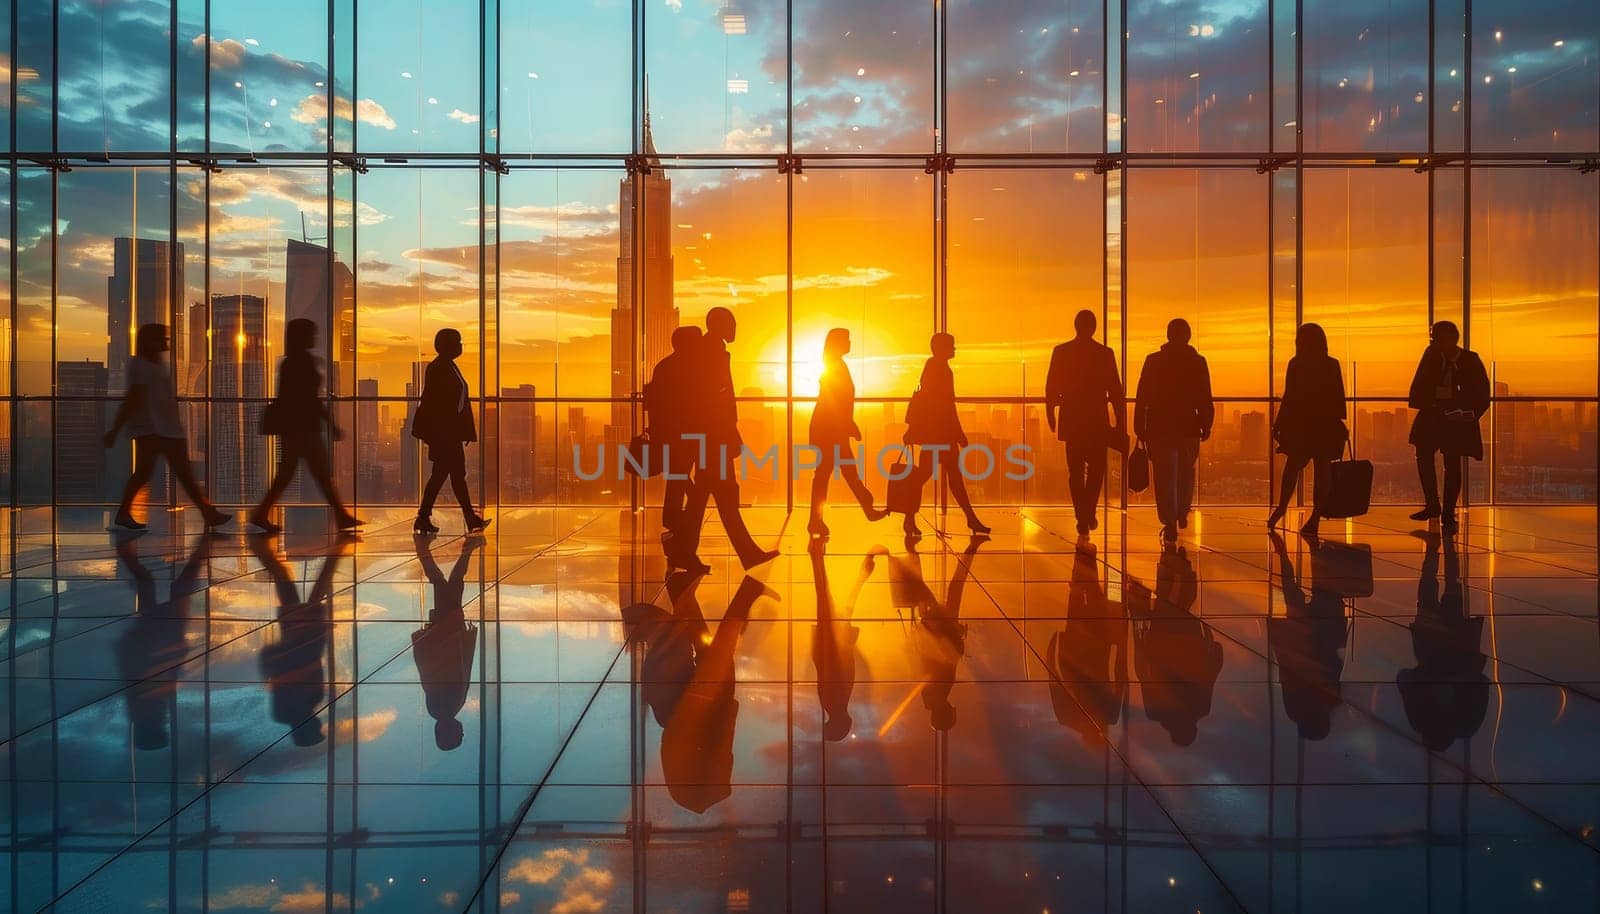 A group of people walking in a large building with a sunset in the background by AI generated image.